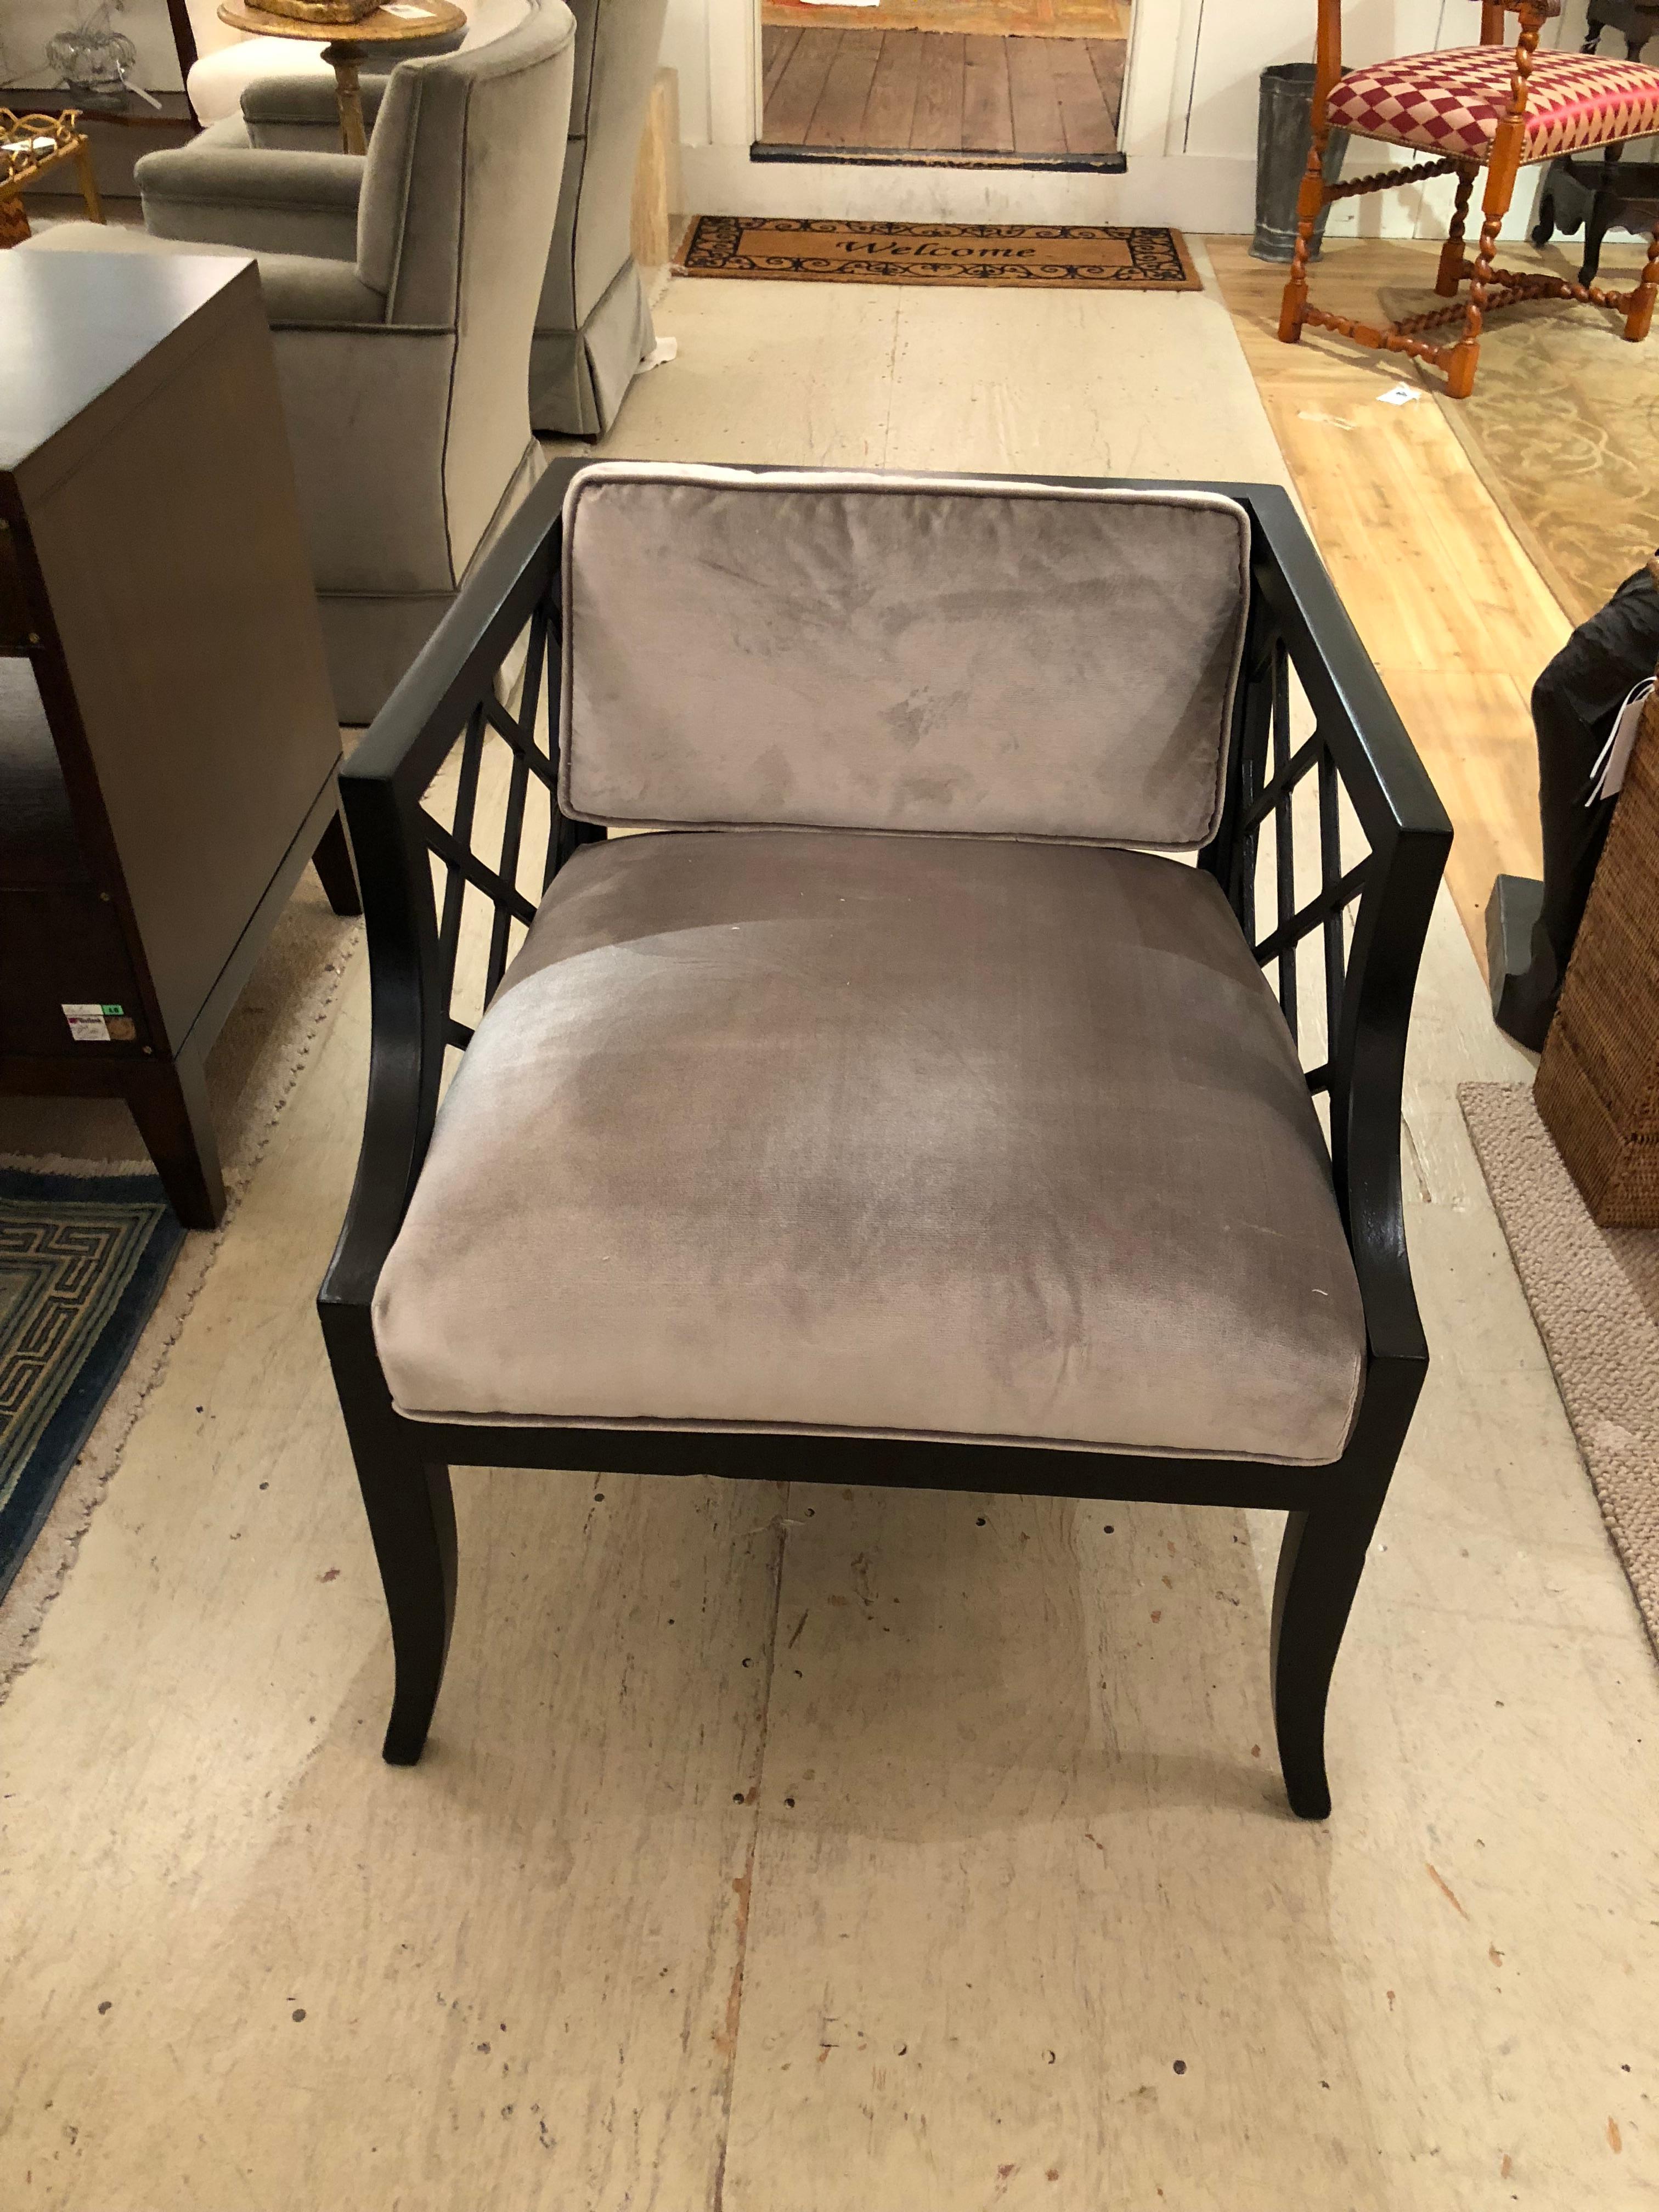 Elegant pair of midcentury Hollywood Regency chairs attributed to Baker in an ebonized finish. Chairs are of a substantial weight and have been newly upholstered in a platinum pale grey cotton velvet. Back cushion is loose; fretwork on back and